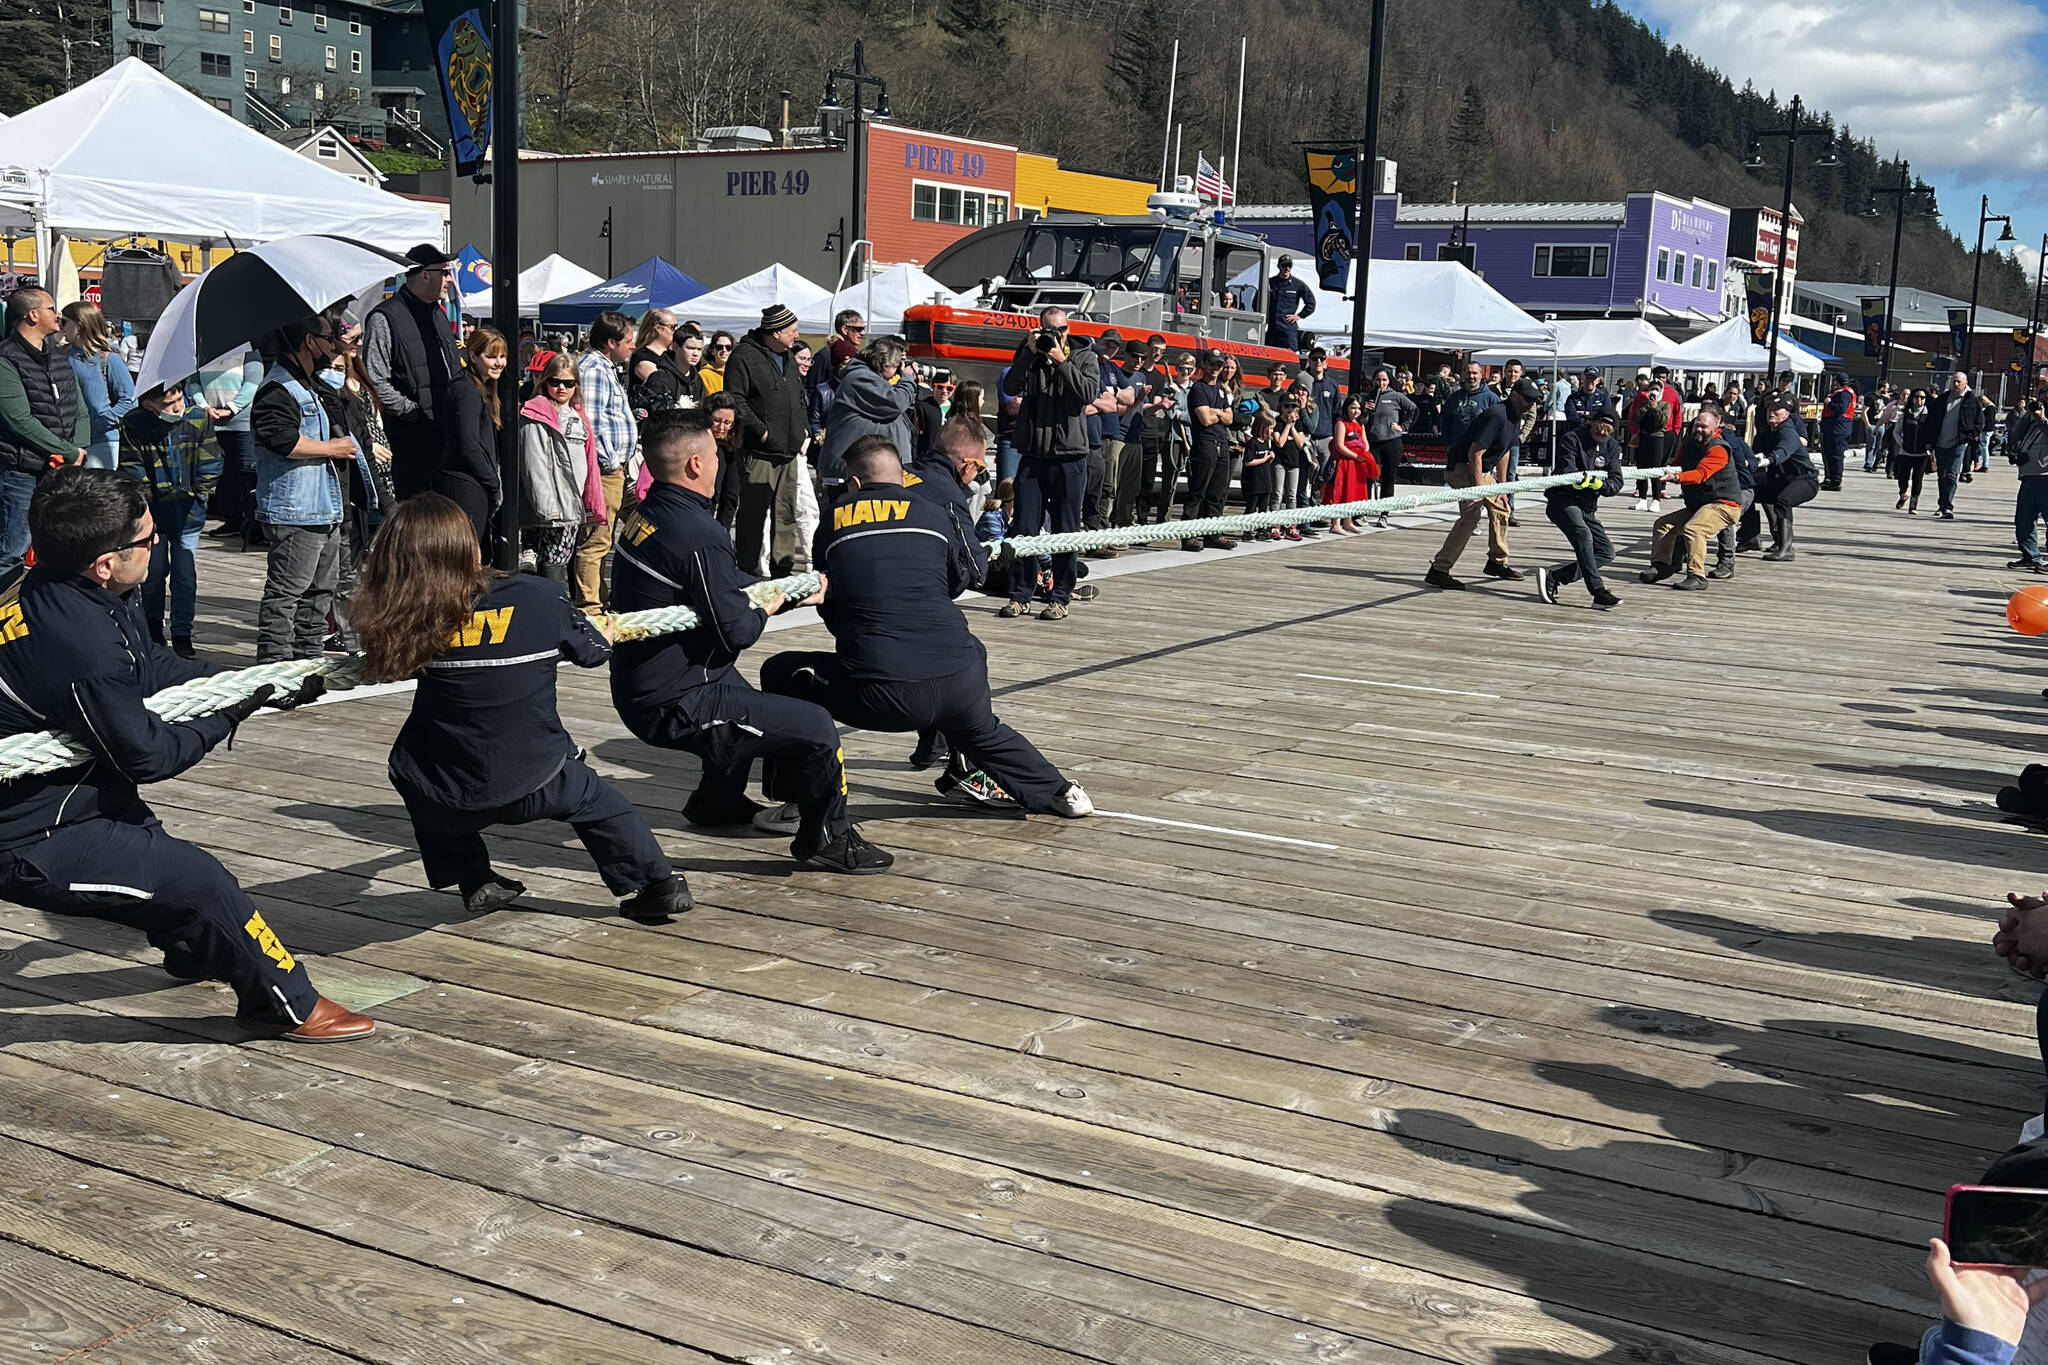 Sailors strives against Juneau Docks and Harbors personnel in a tug-of-war at the 12th Annual Maritime Festival on May 7, 2022. (Courtesy photo / Ryan O’Shaughnessy)